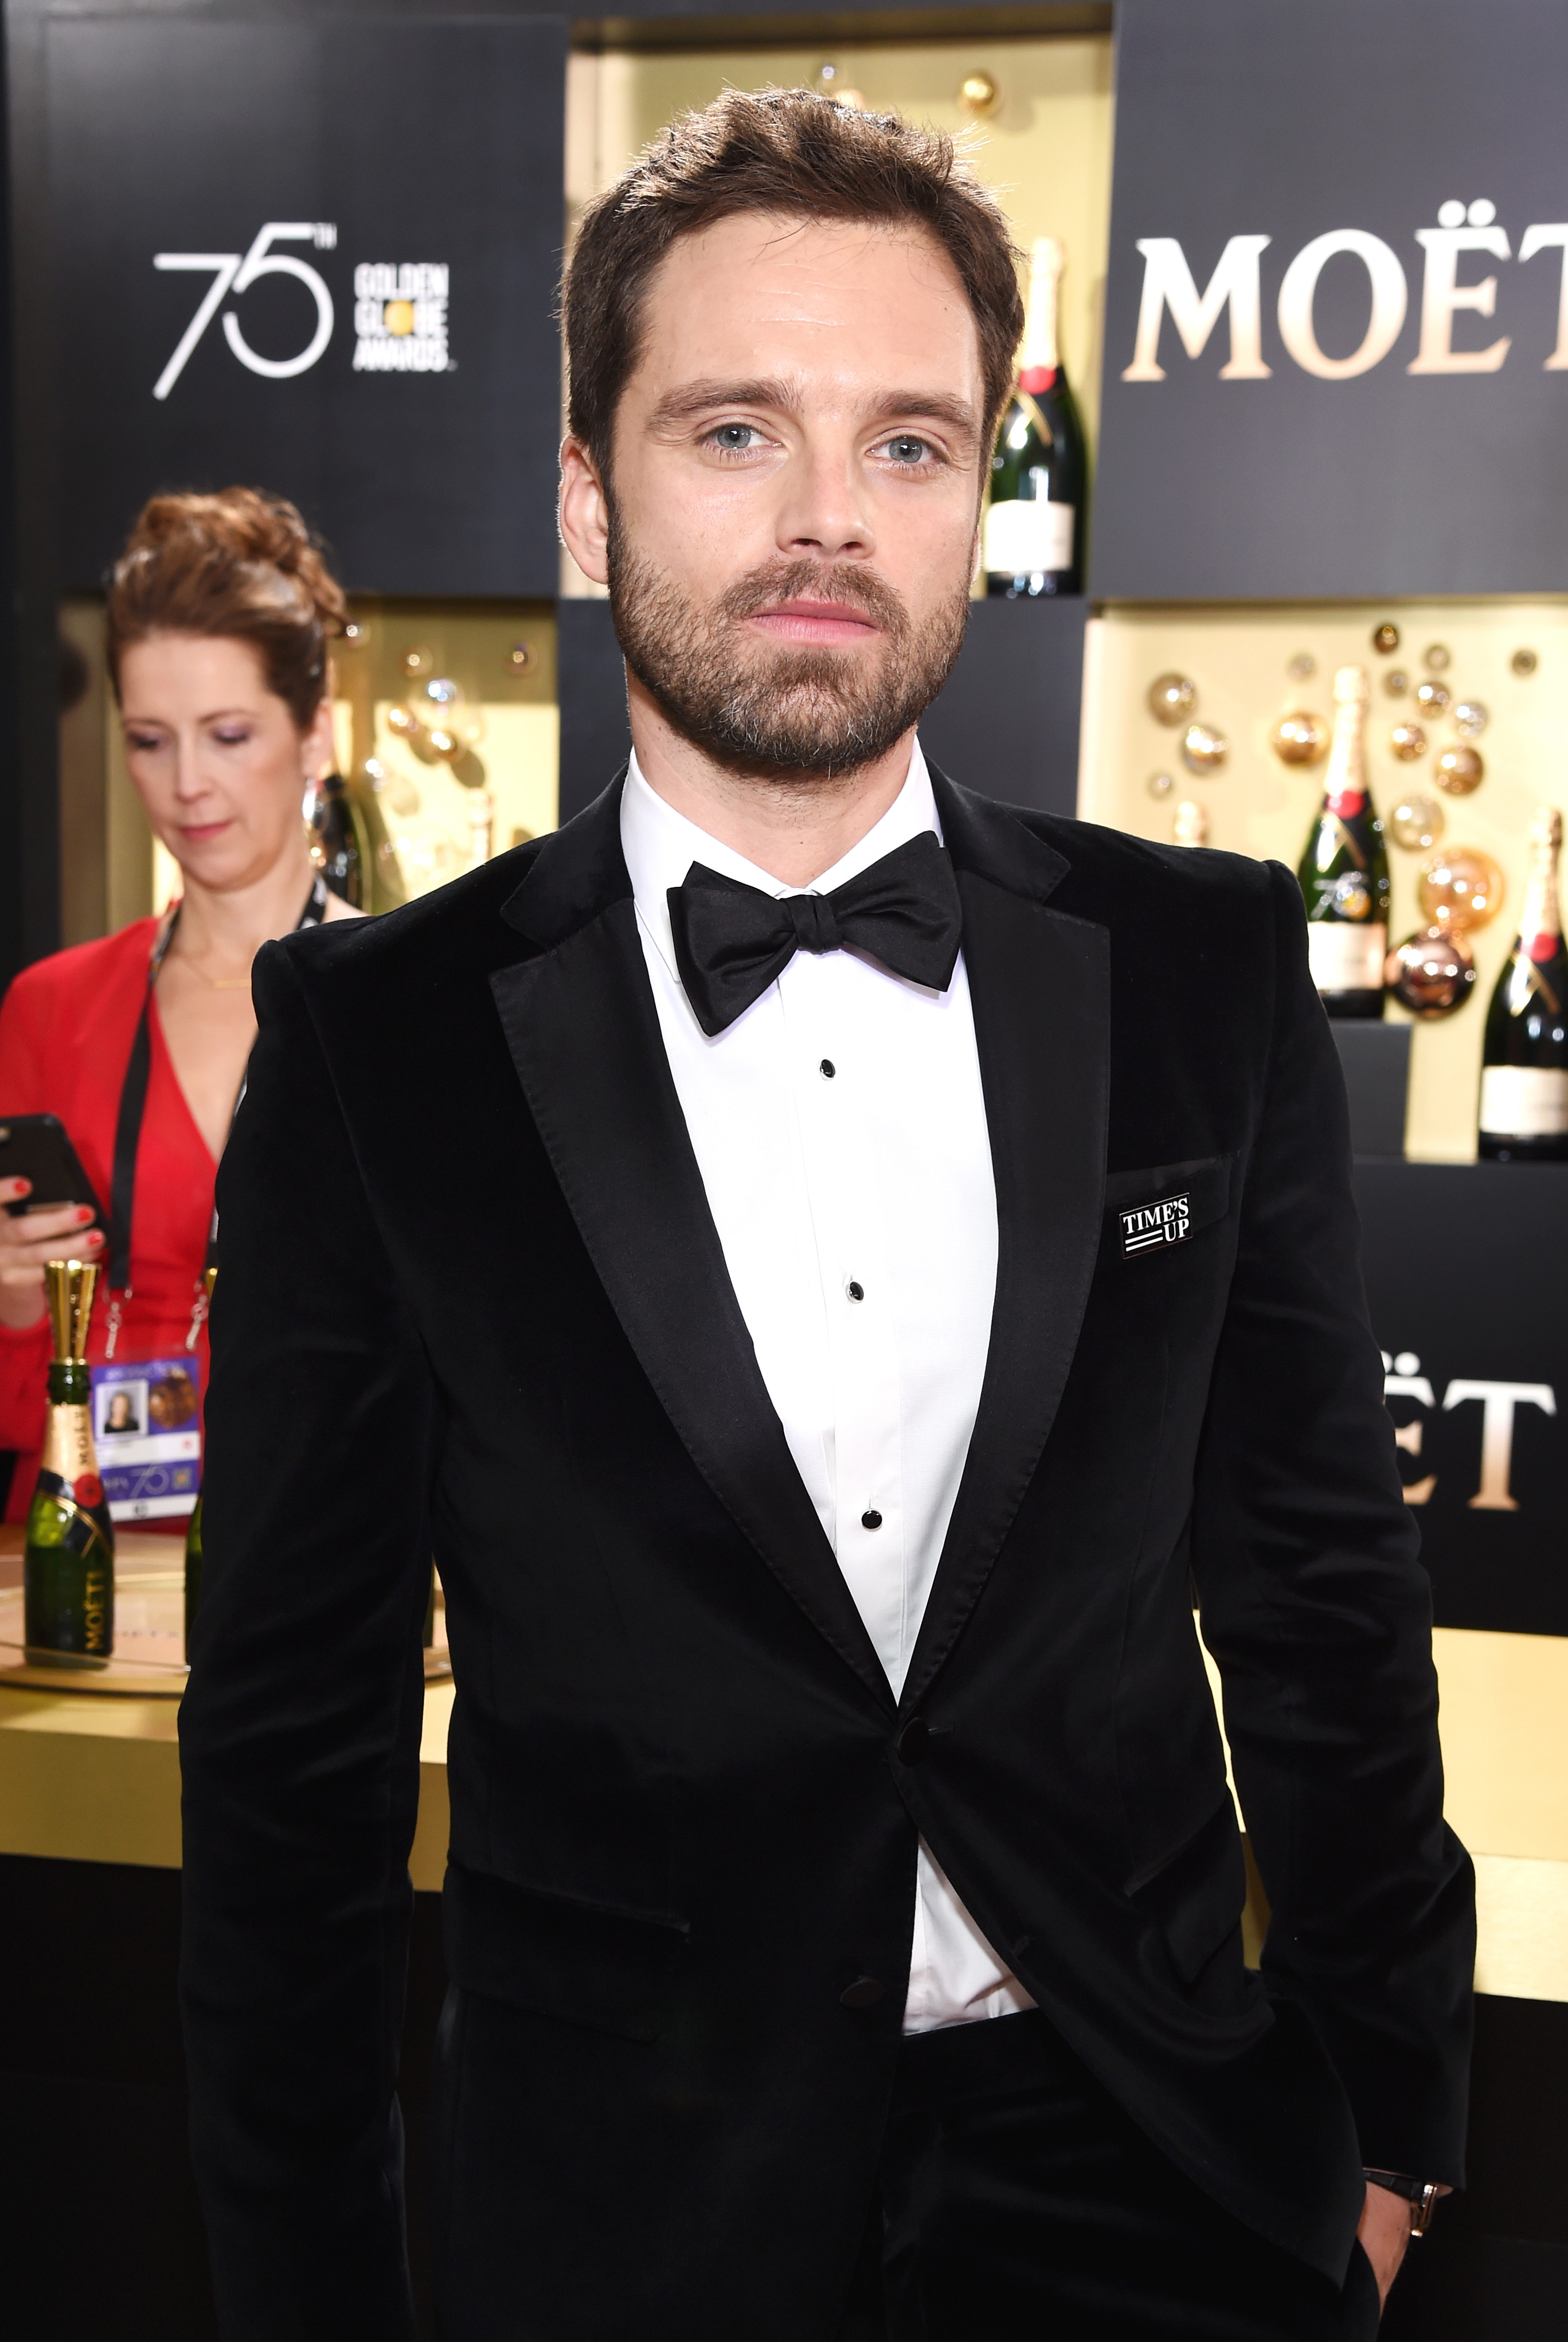 Actor Sebastian Stan celebrates The 75th Annual Golden Globe Awards with Moet & Chandon at The Beverly Hilton Hotel on January 7, 2018 in Beverly Hills, California. (Michael Kovac—Getty Images)